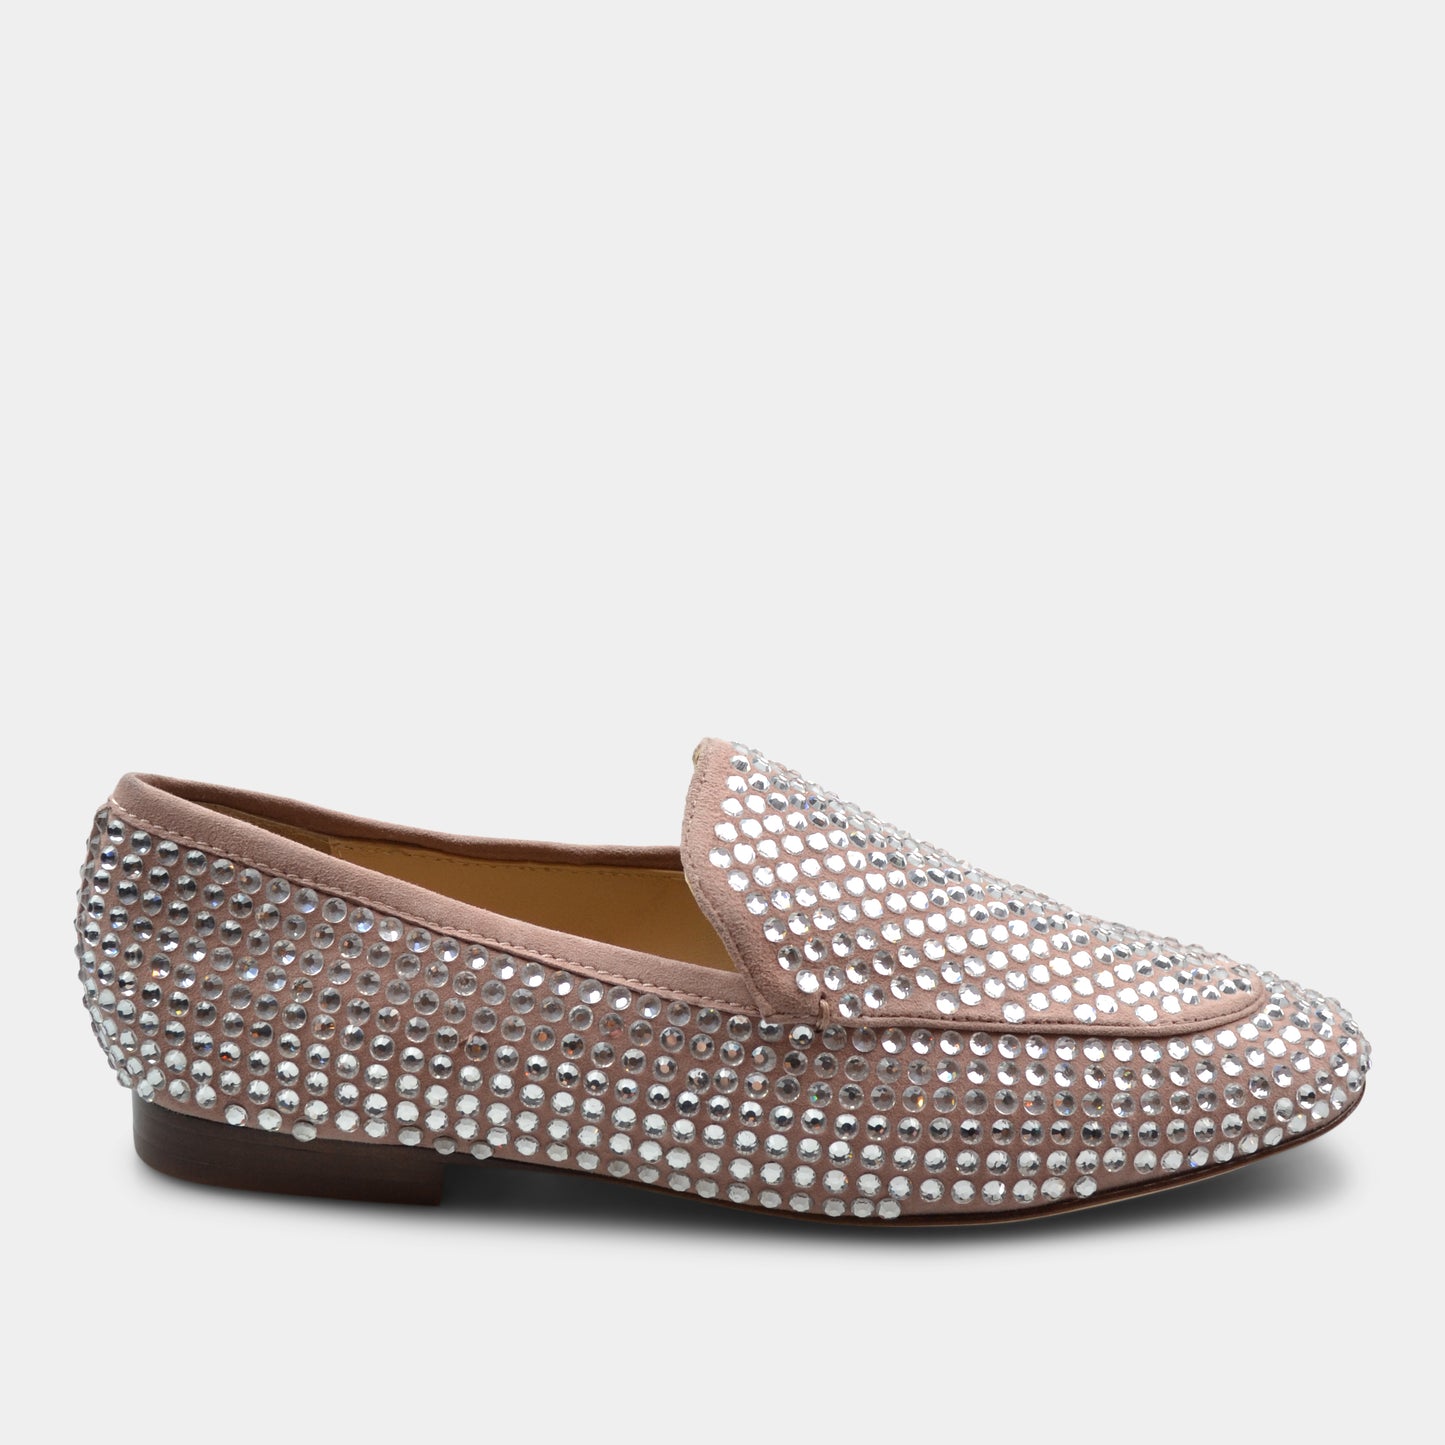 LOLA CRUZ LOAFERS IN PINK